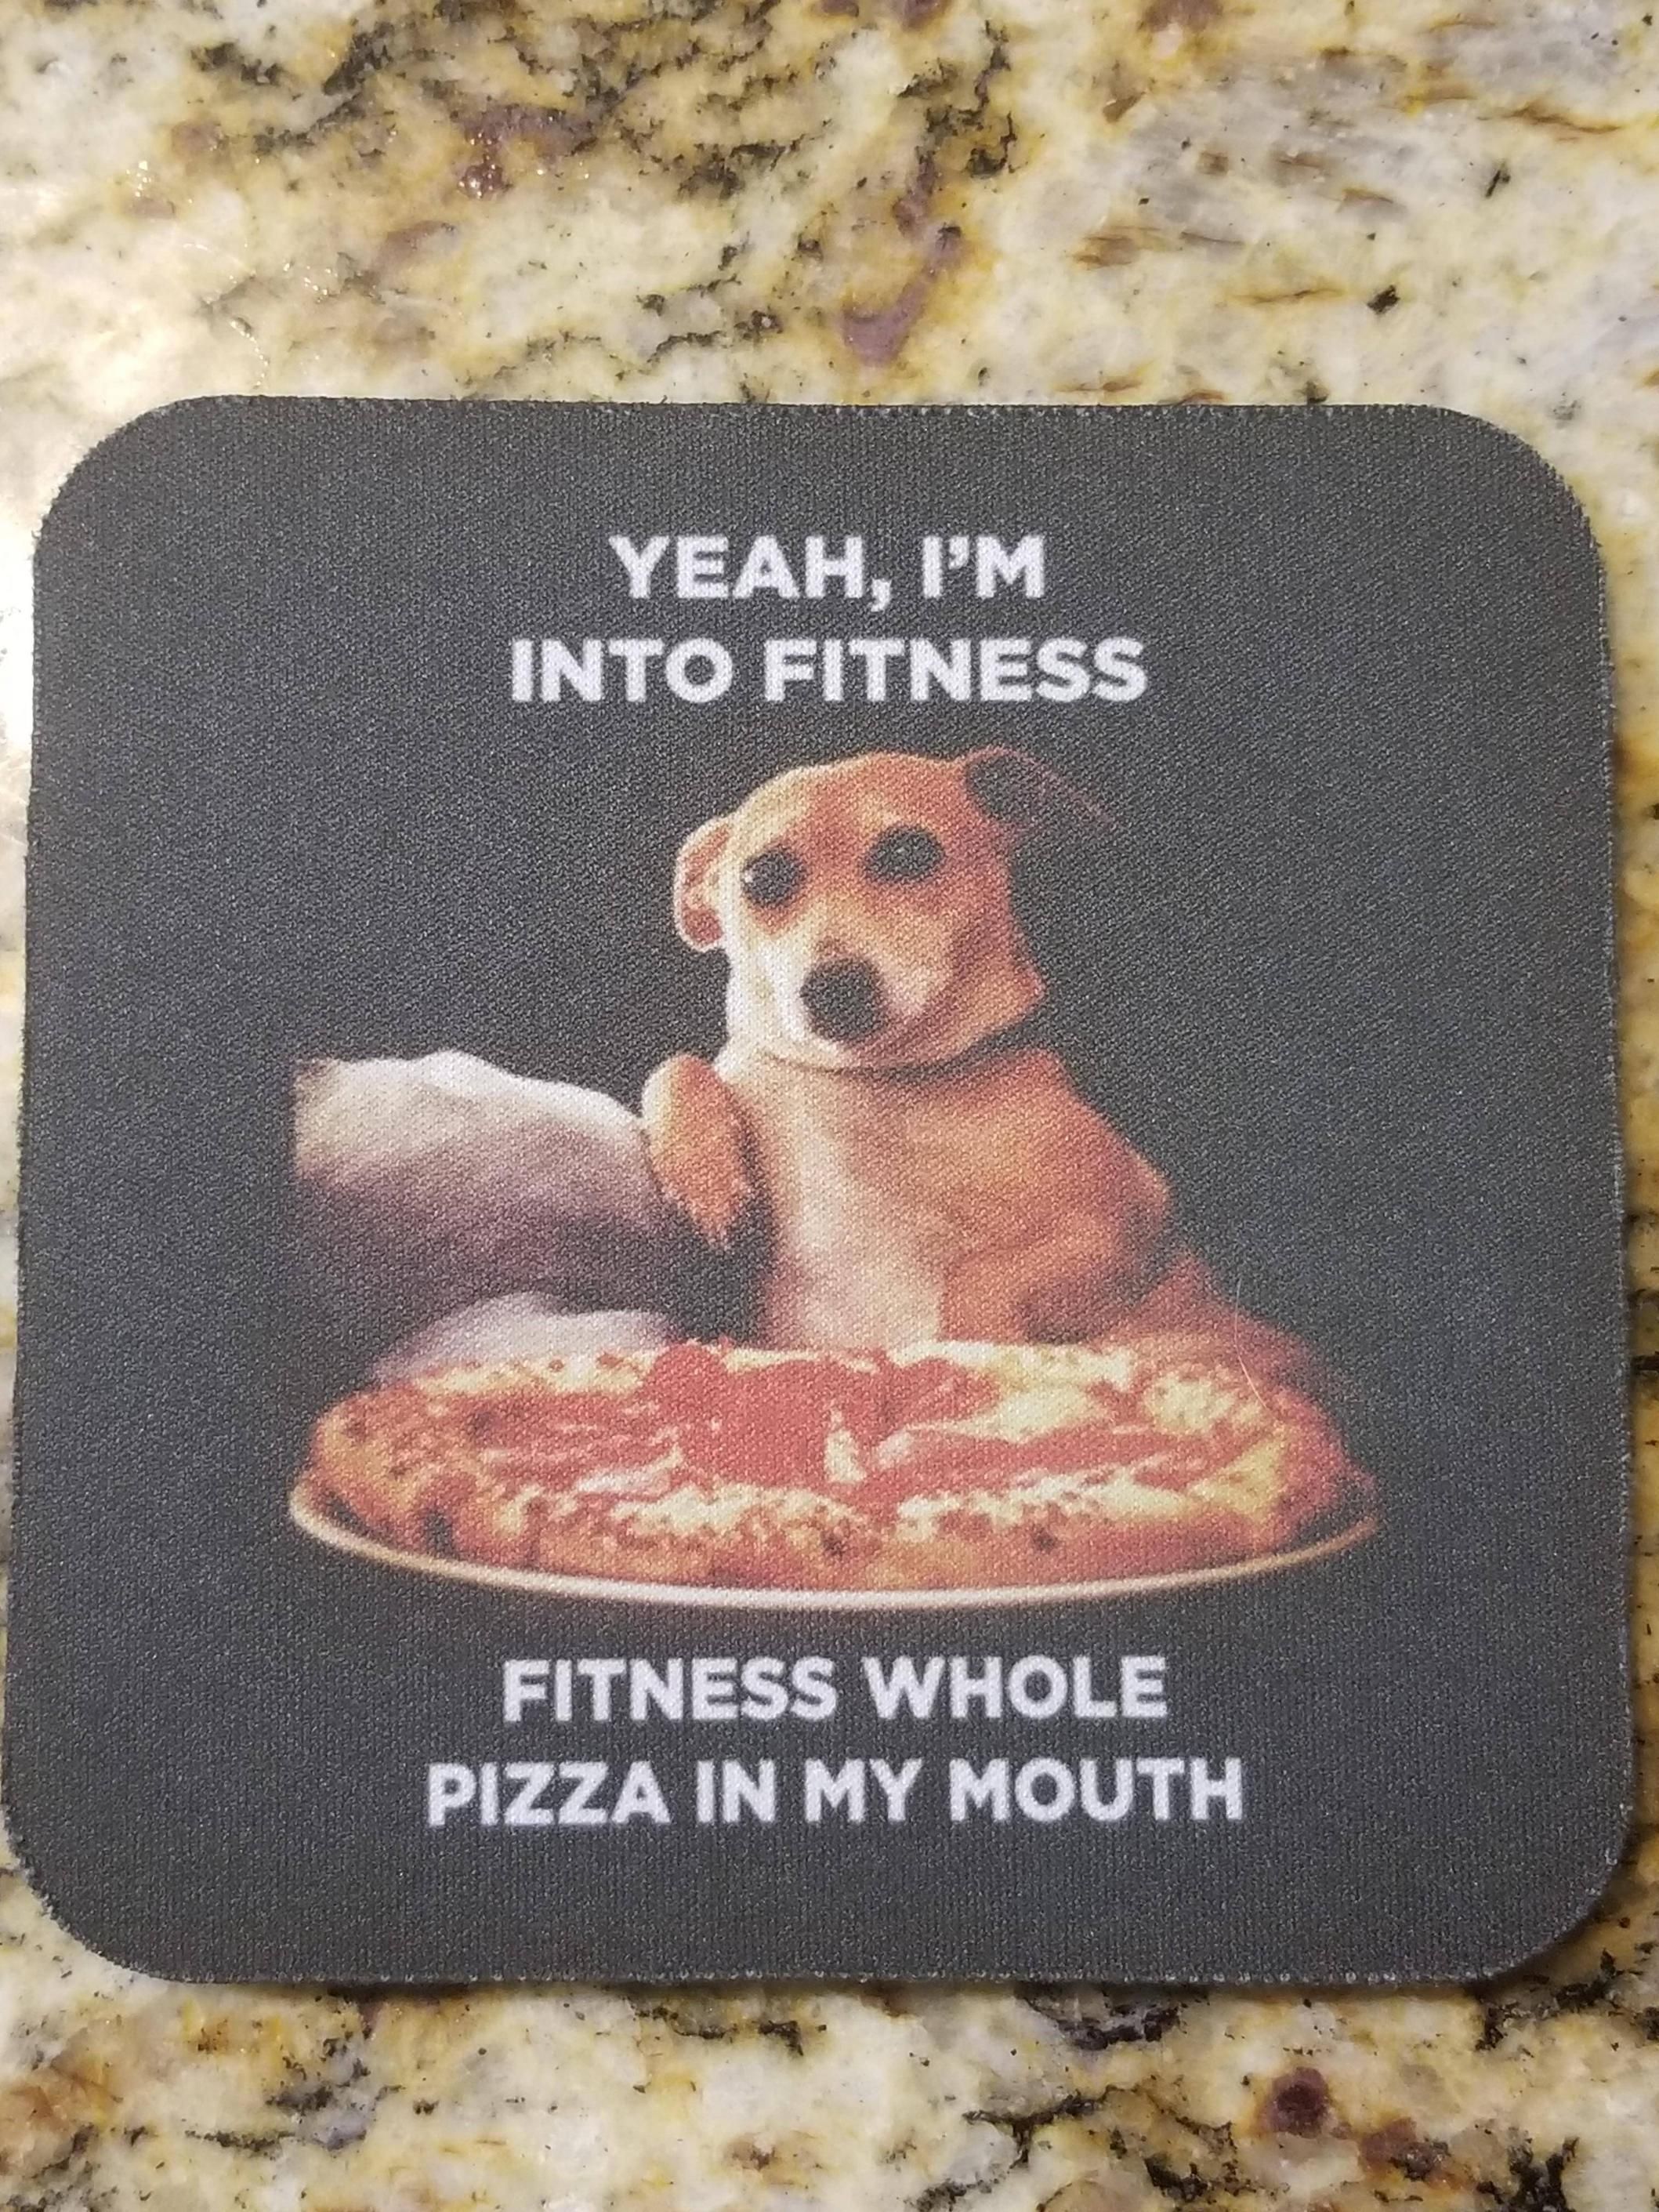 And here's the coaster at MY house...